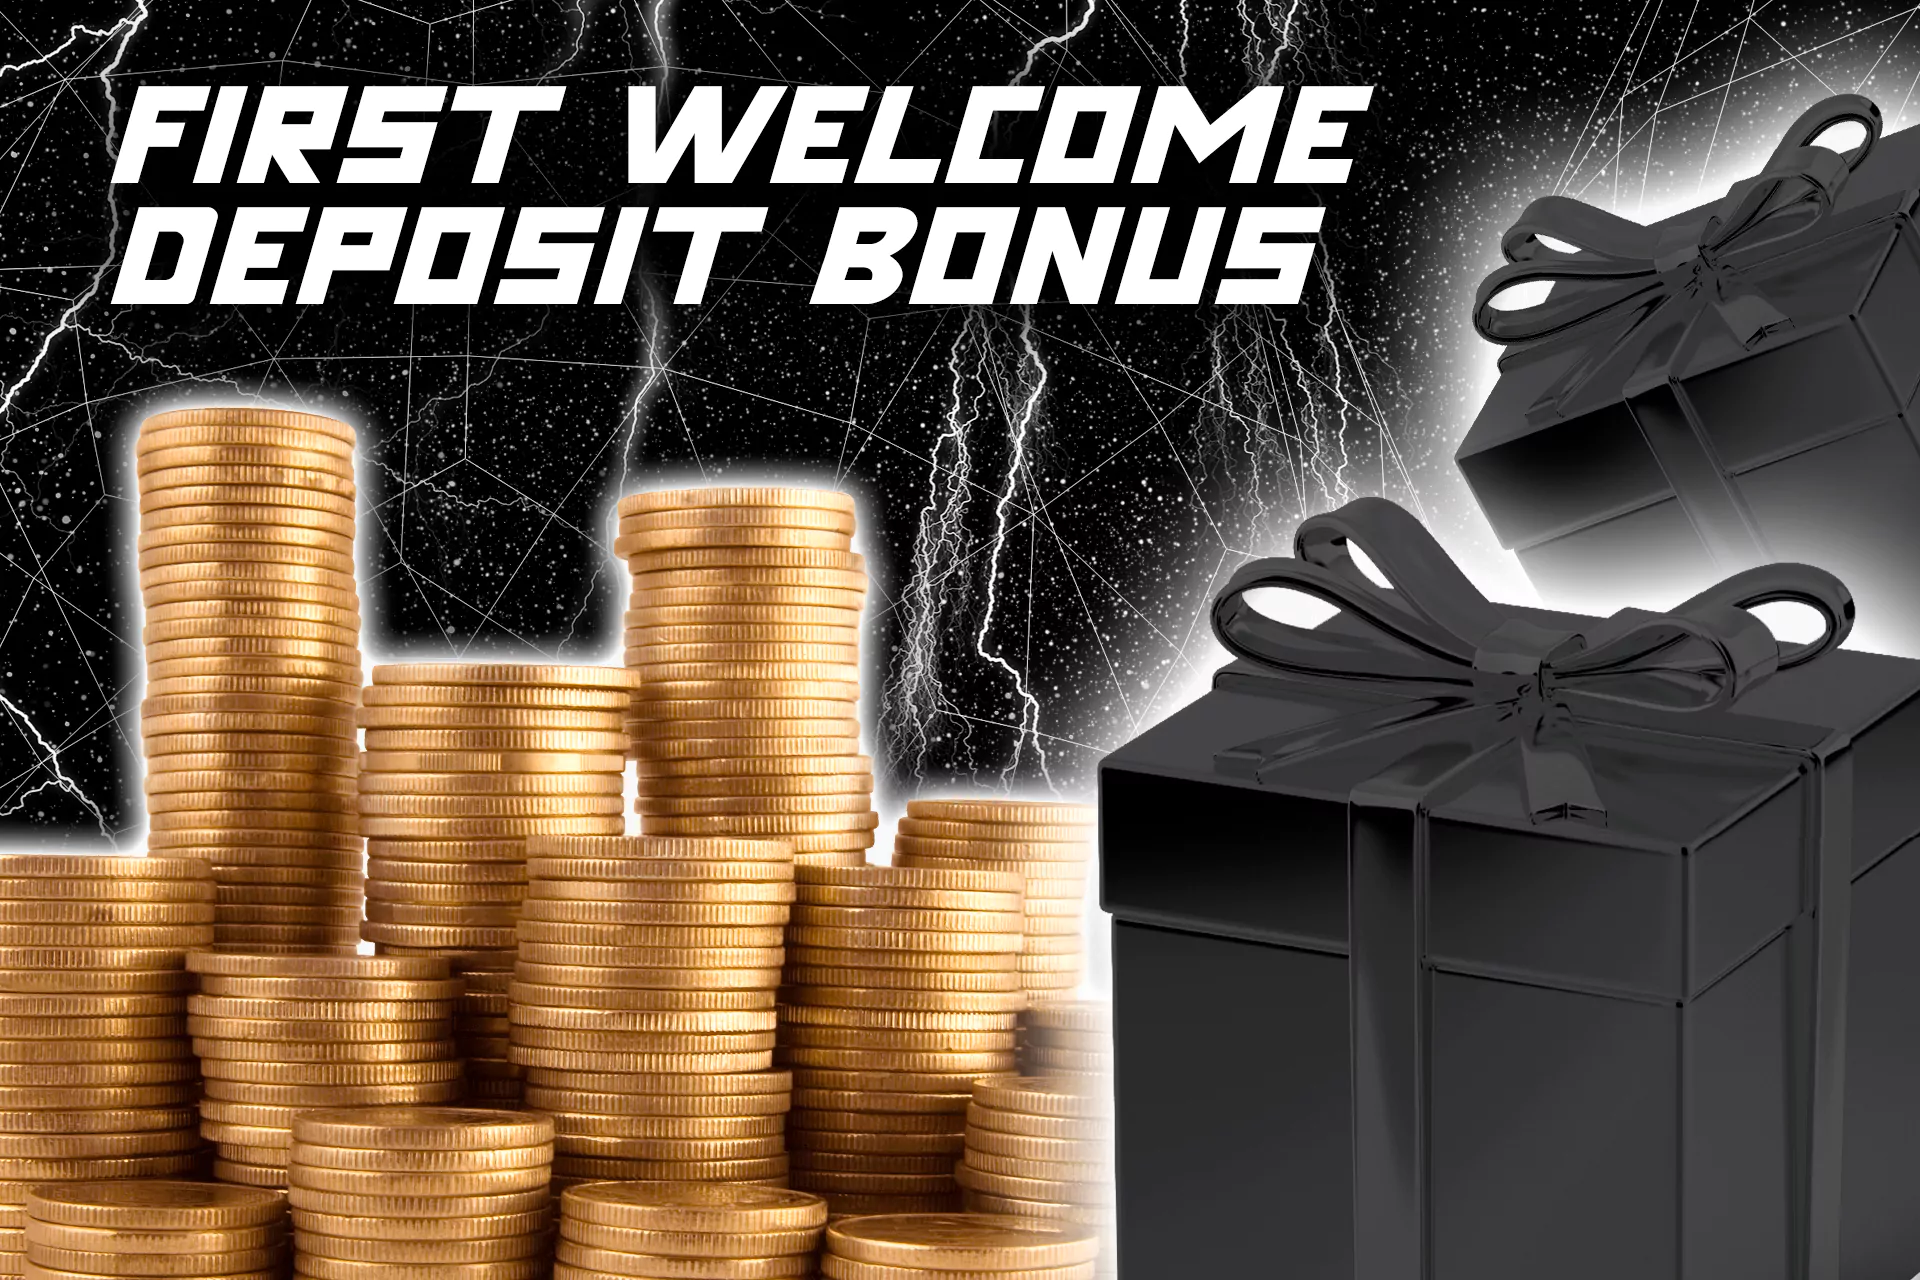 Shortly about meaning of welcome deposit bonuses.